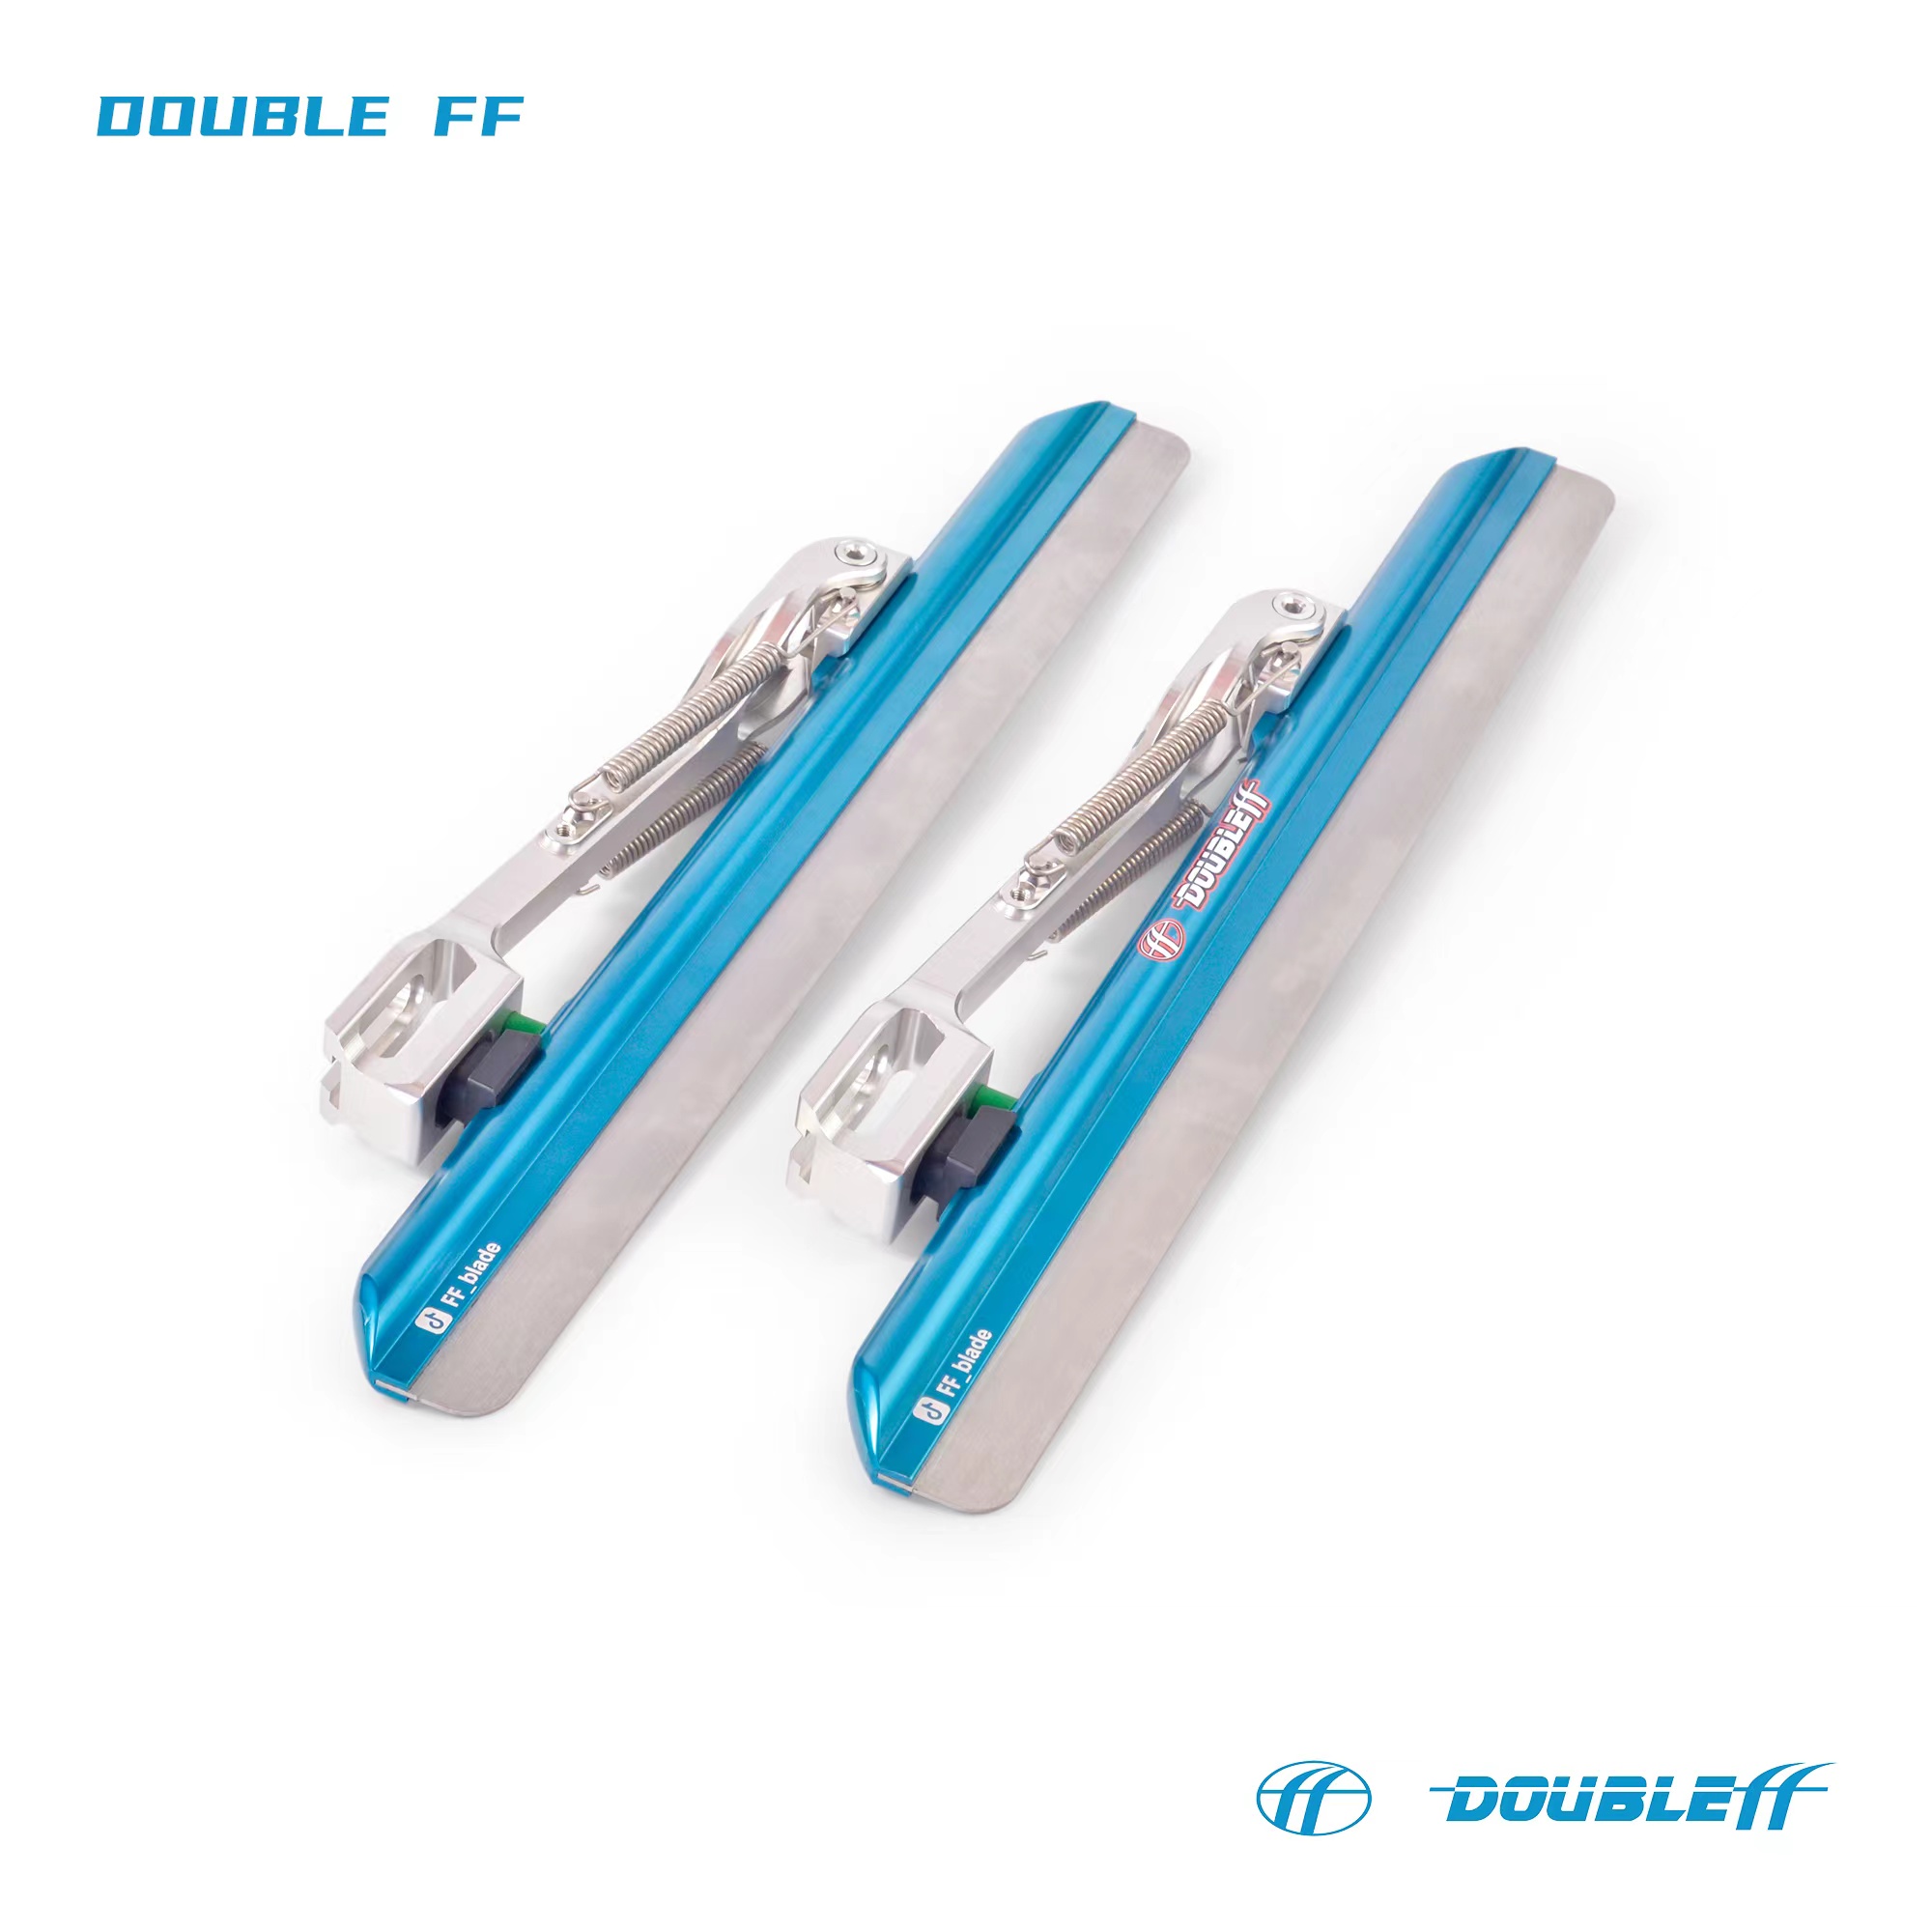 Double FF 64 HRC Long Track Ice Skate Blades CNC Aluminum 7005 Ice Skate Blades For training or competition